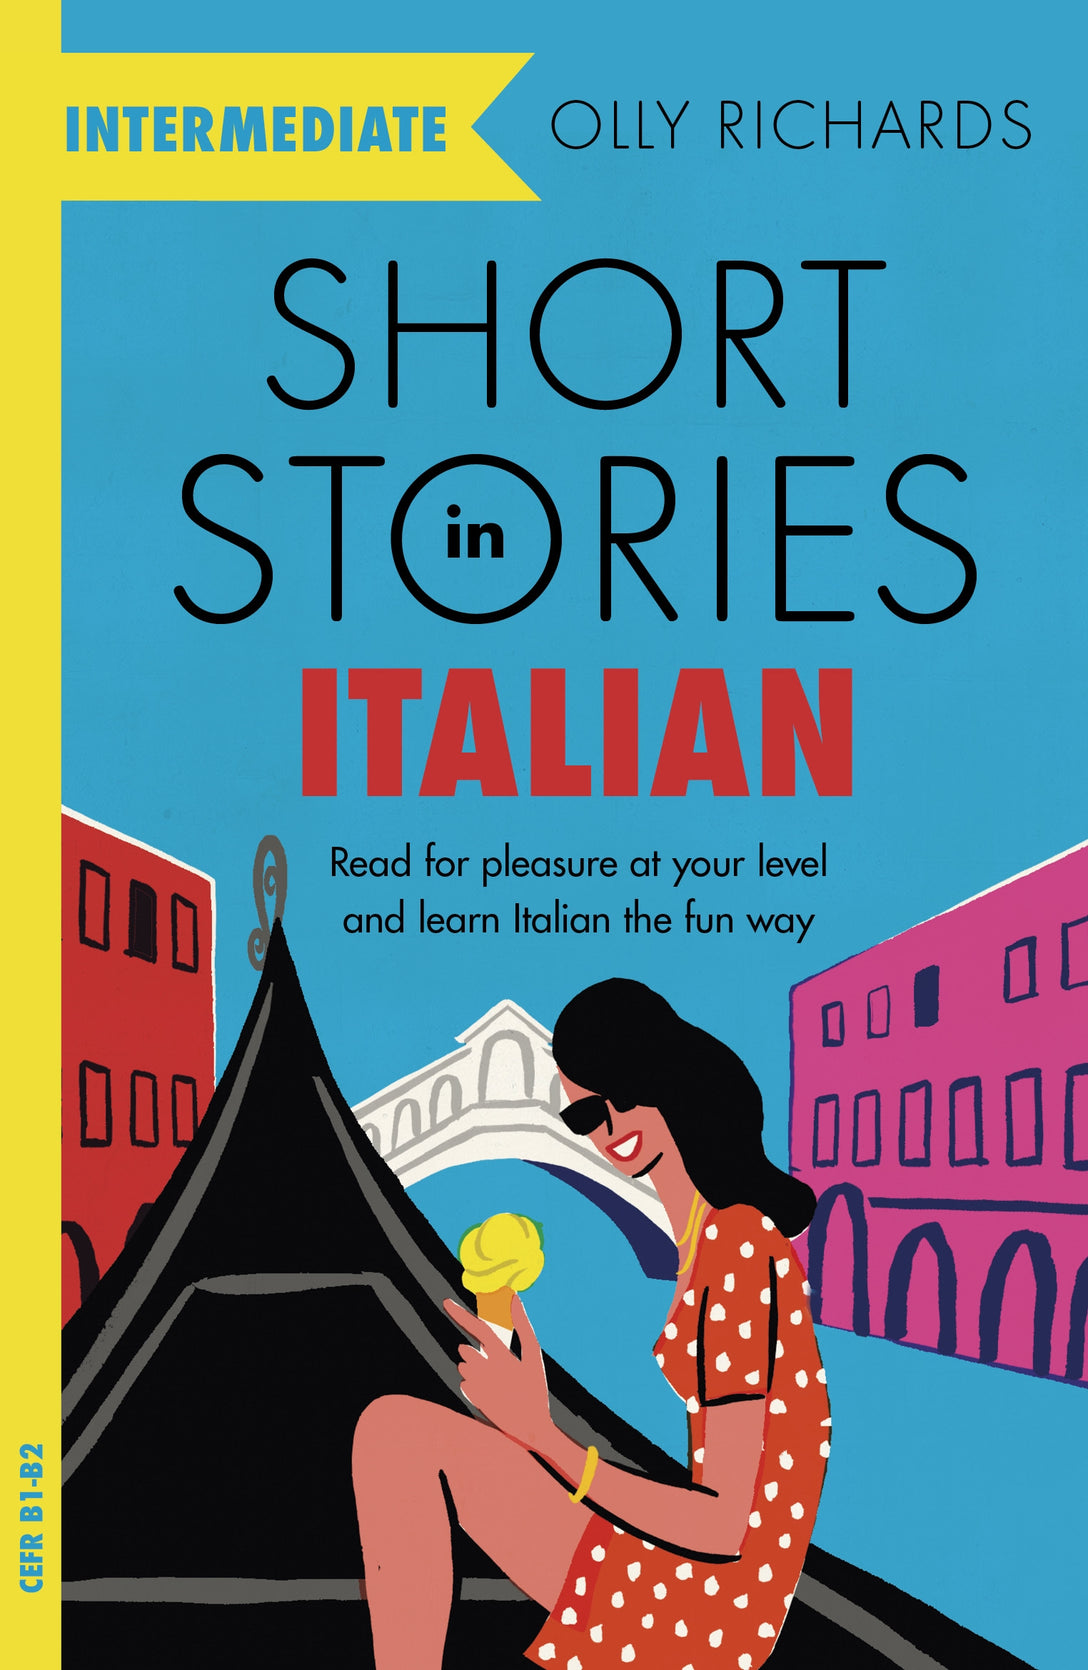 Short Stories in Italian  for Intermediate Learners by Olly Richards